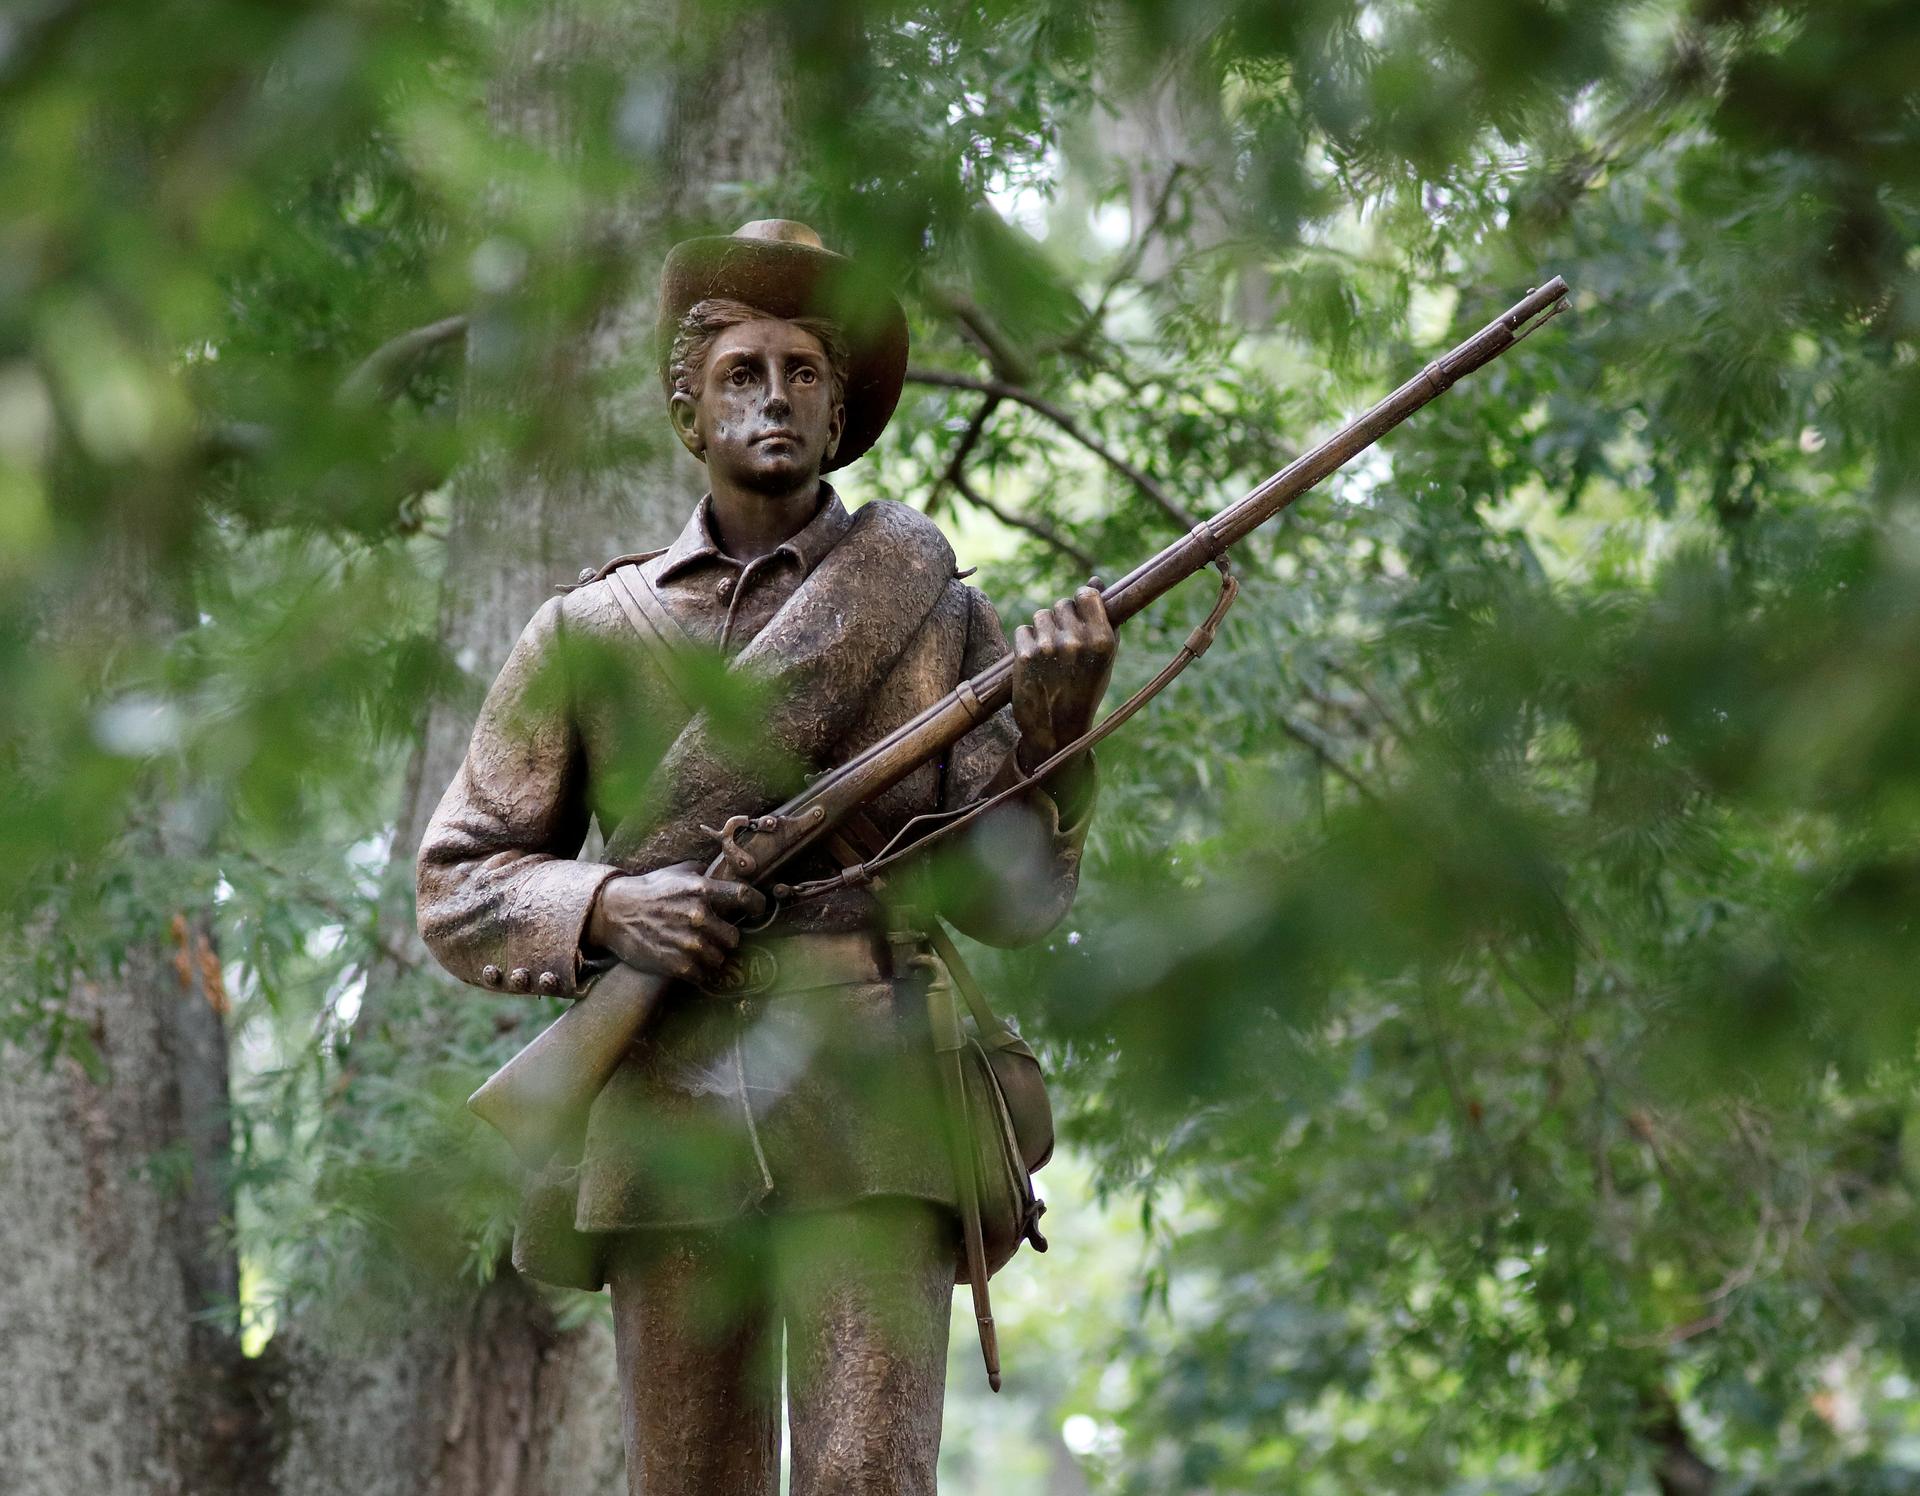 A statue of a Confederate soldier nicknamed Silent Sam stands on the campus of the University of North Carolina in Chapel Hill, North Carolina, U.S. August 17, 2017. 